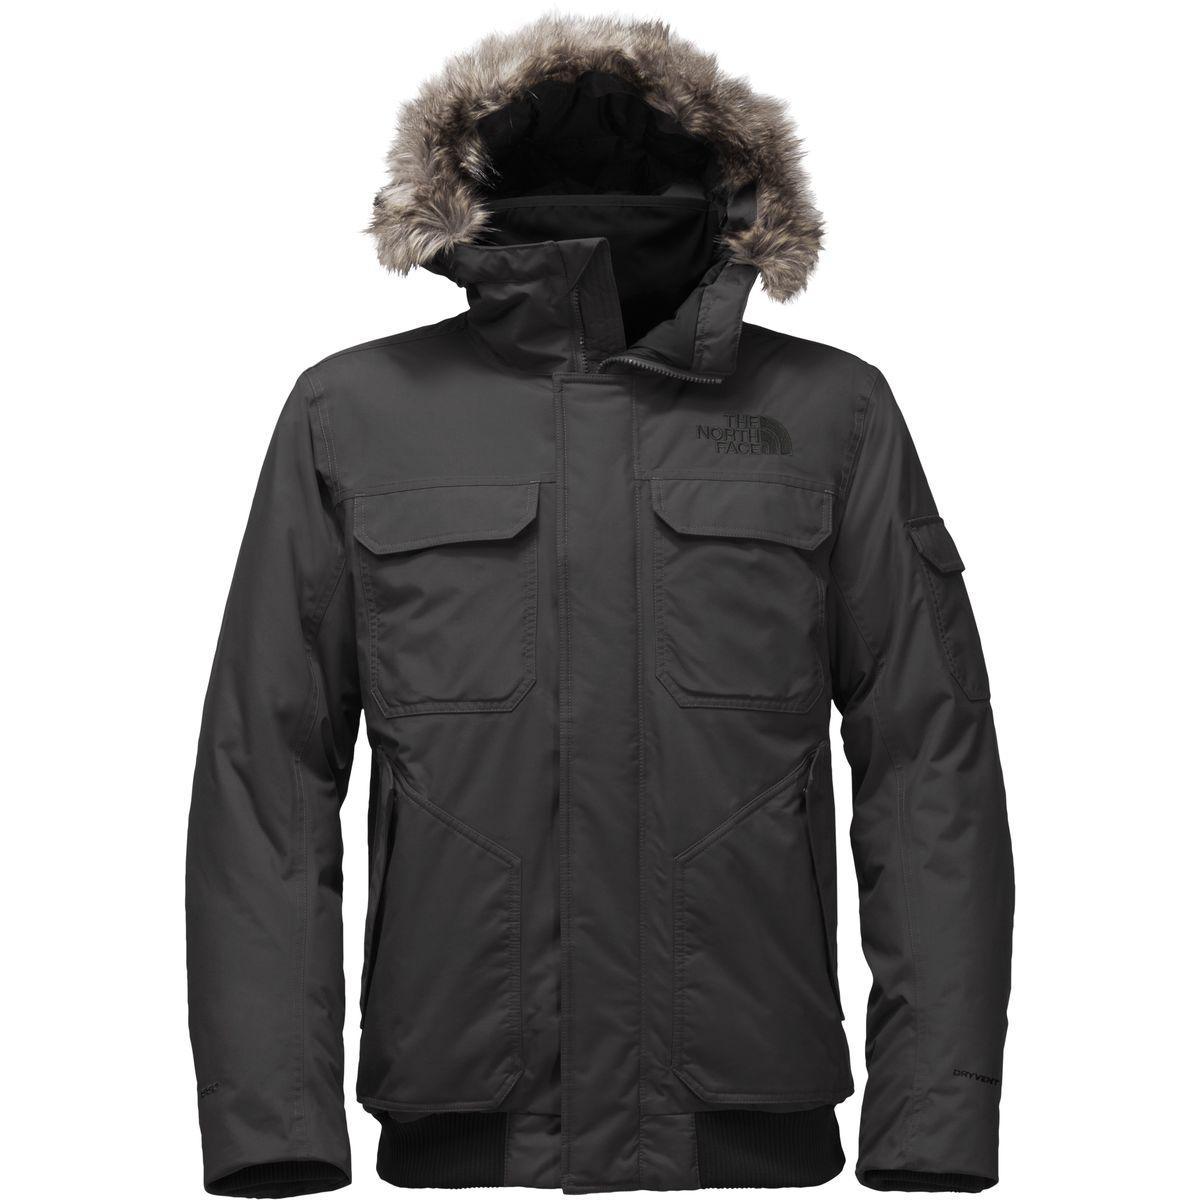 The North Face Gotham Hooded Down Jacket Iii in Gray for Men - Lyst